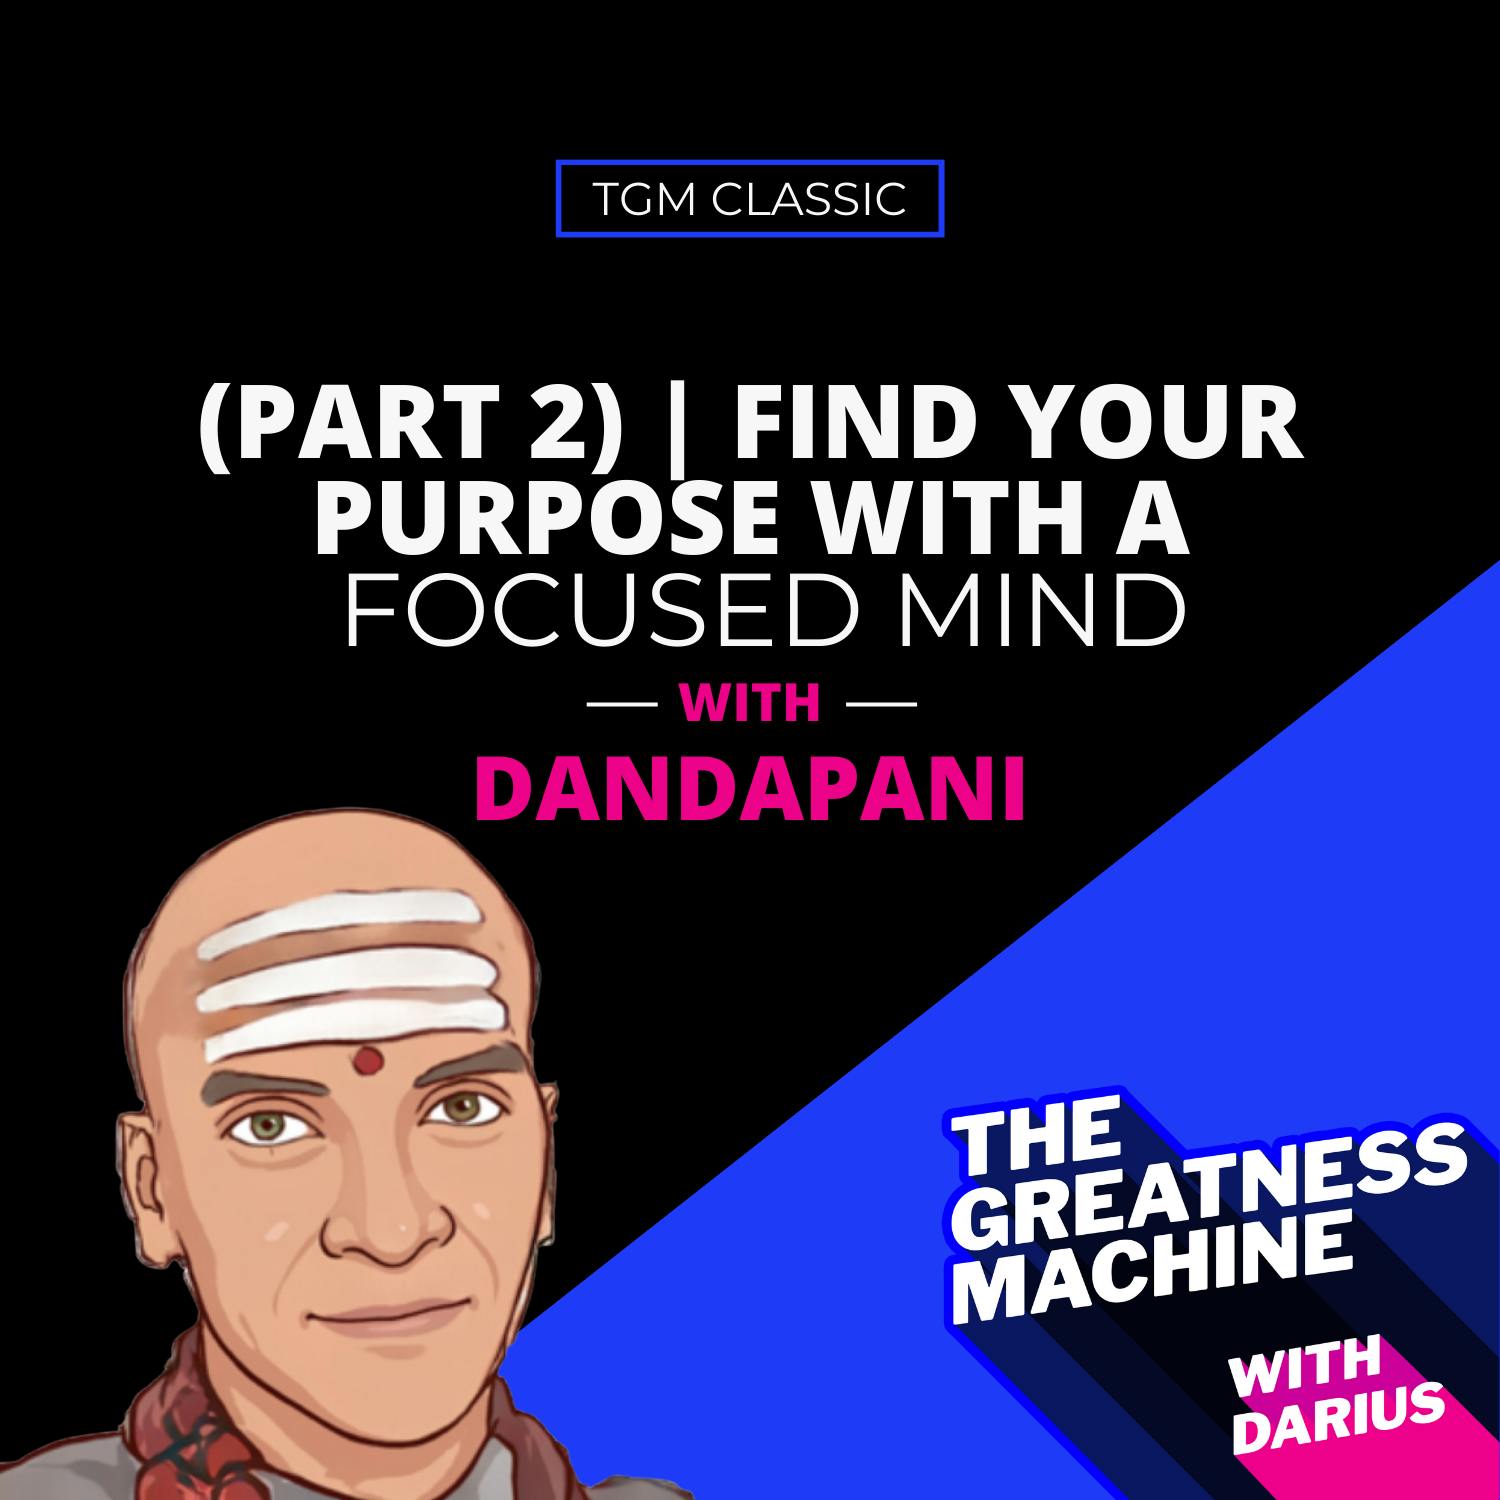 TGM Classic | Dandapani (Part 2) | Find Your Purpose With A Focused Mind